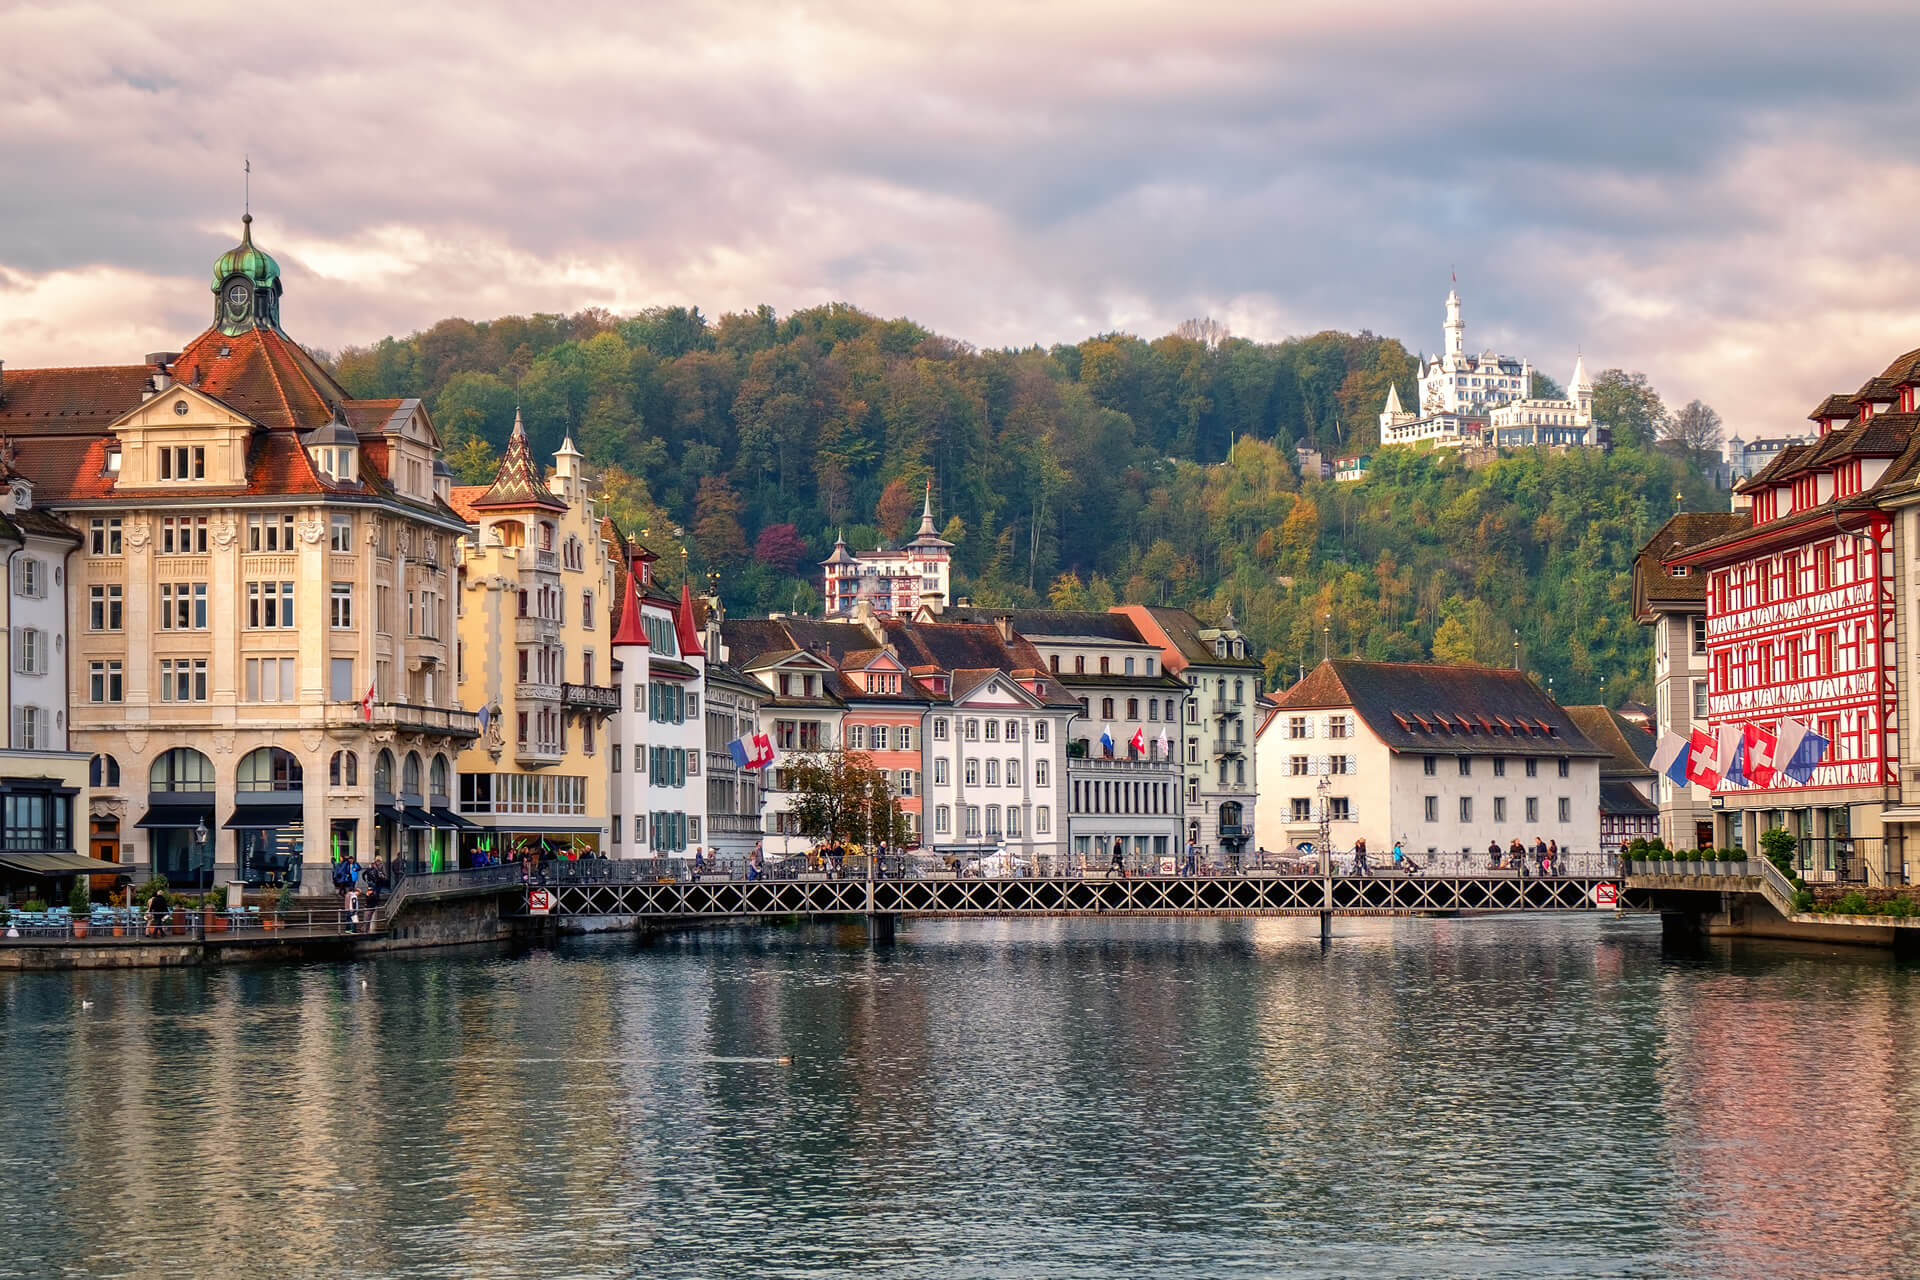 Old town of Lucerne and Chateau Gutsch on Reuss River